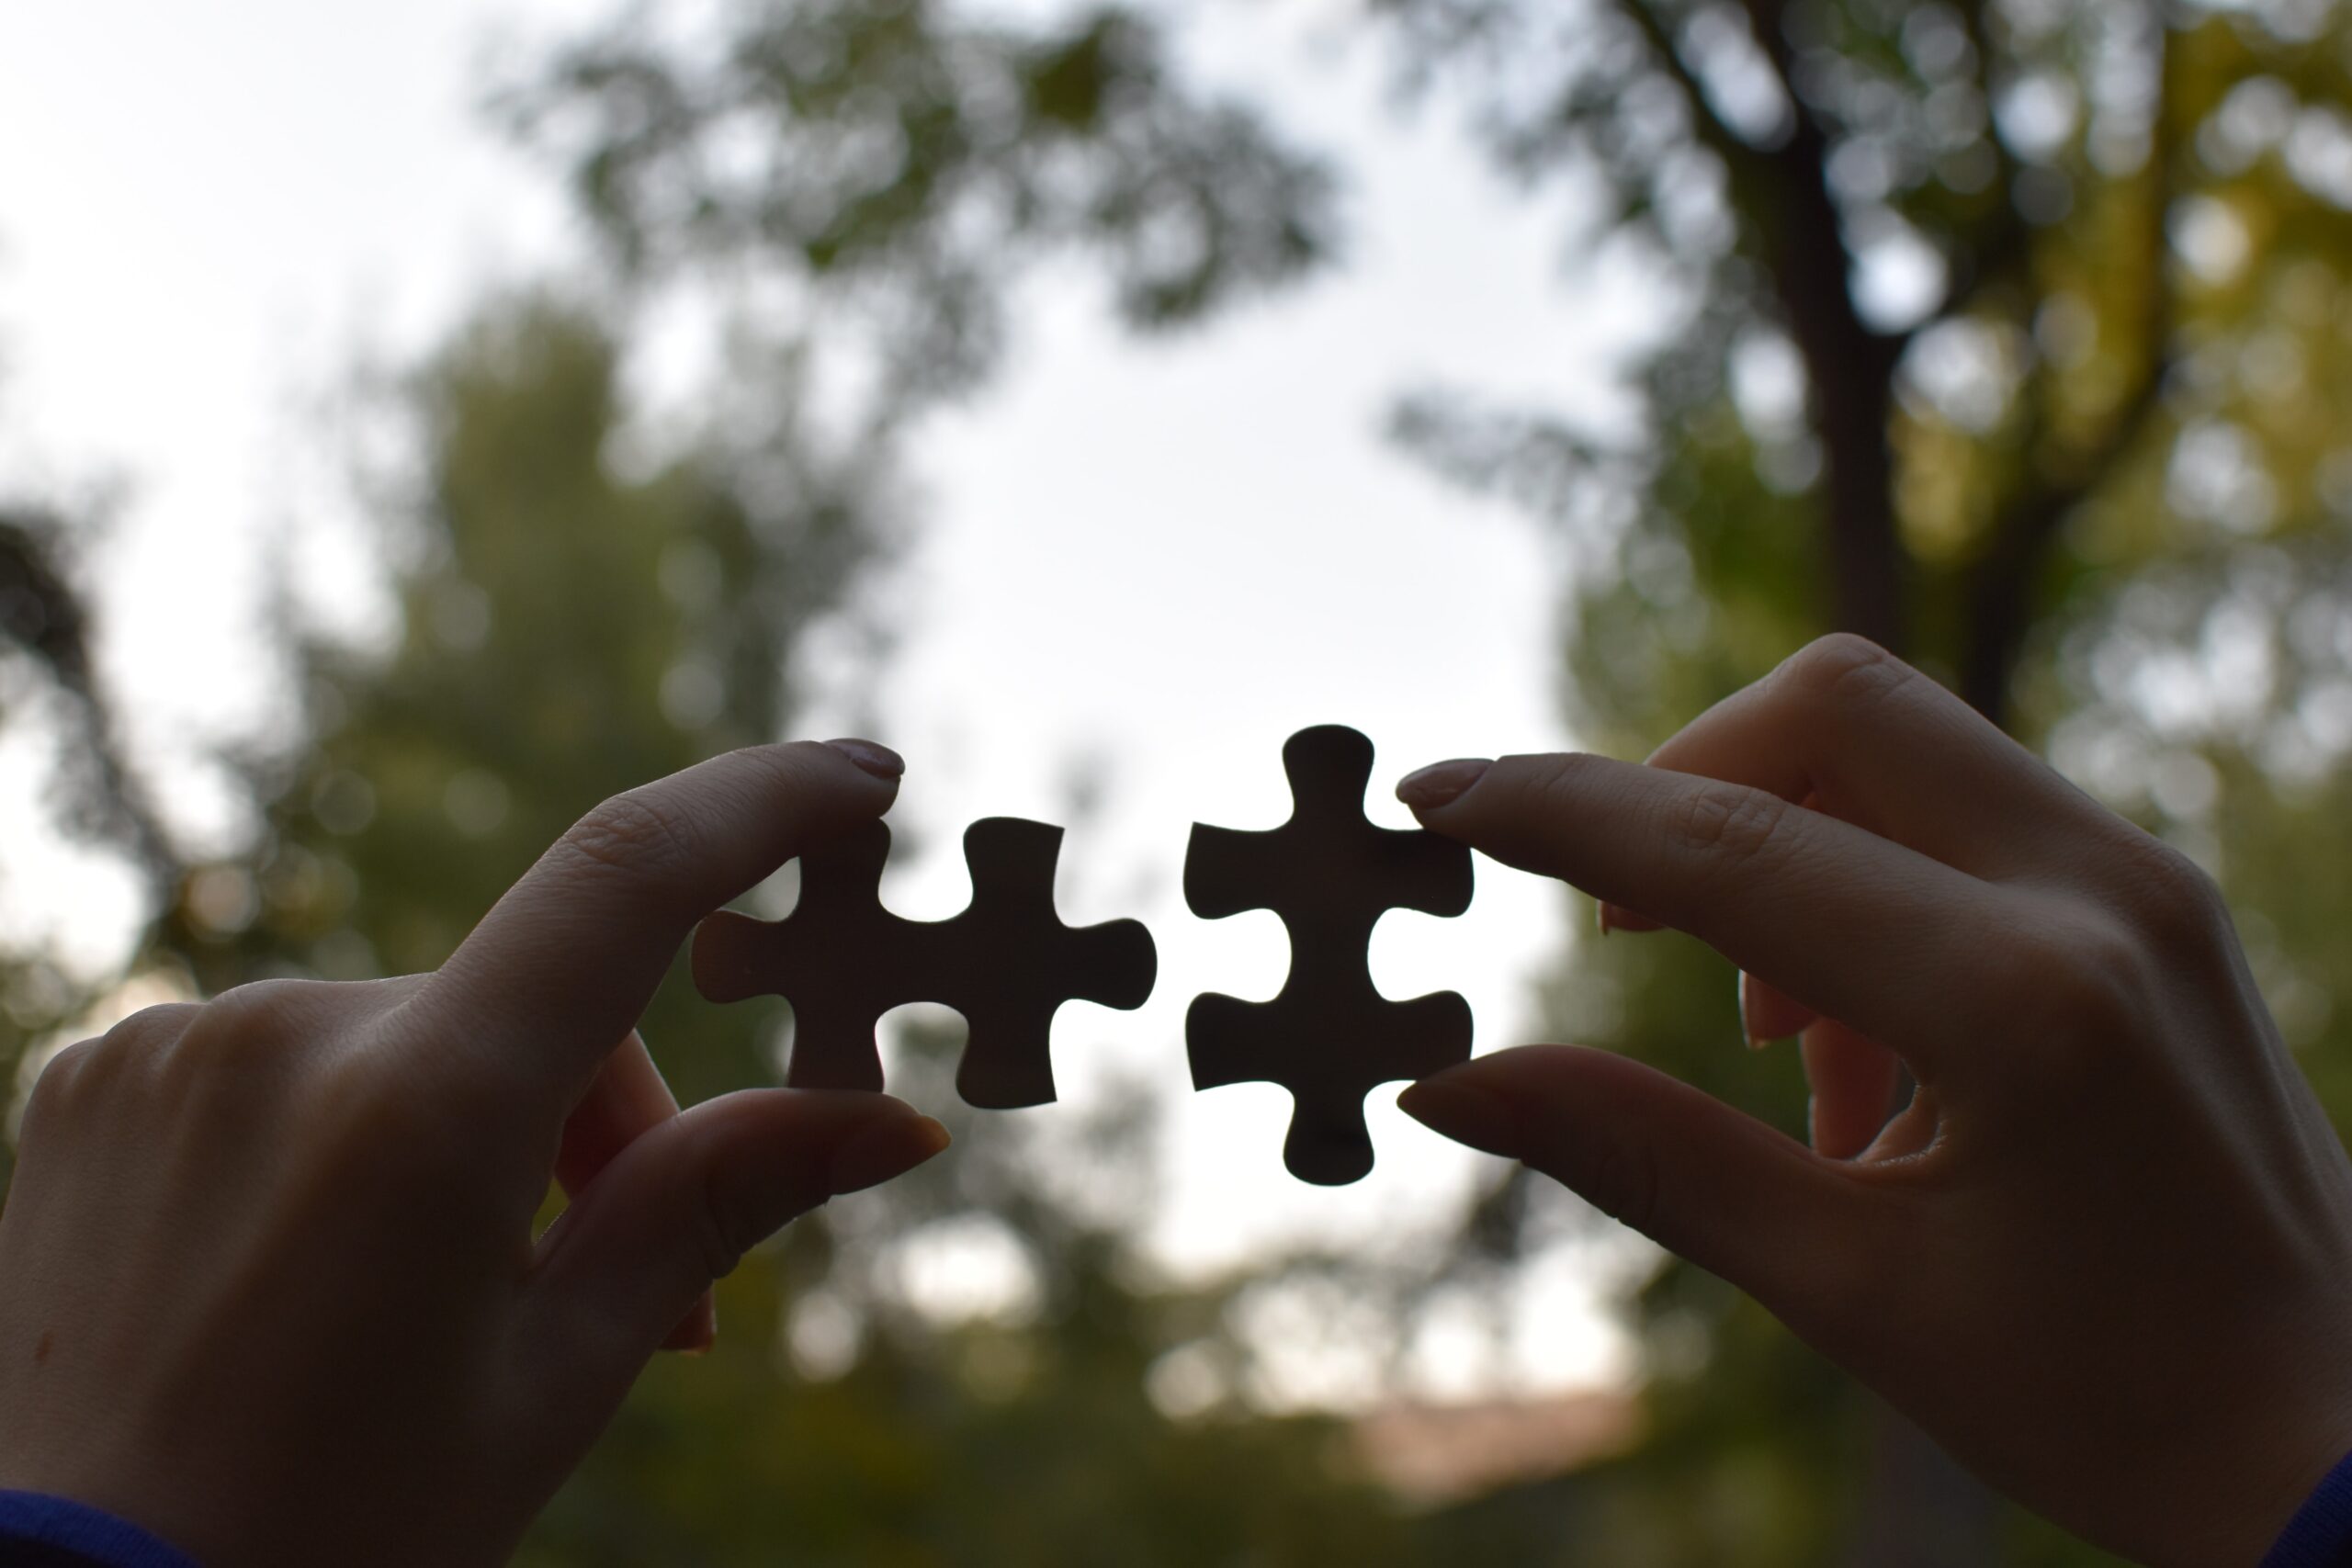 Two hands holding separate jigsaw puzzle pieces against a blurred natural background, symbolizing the search for an affordable Dallas dentist.